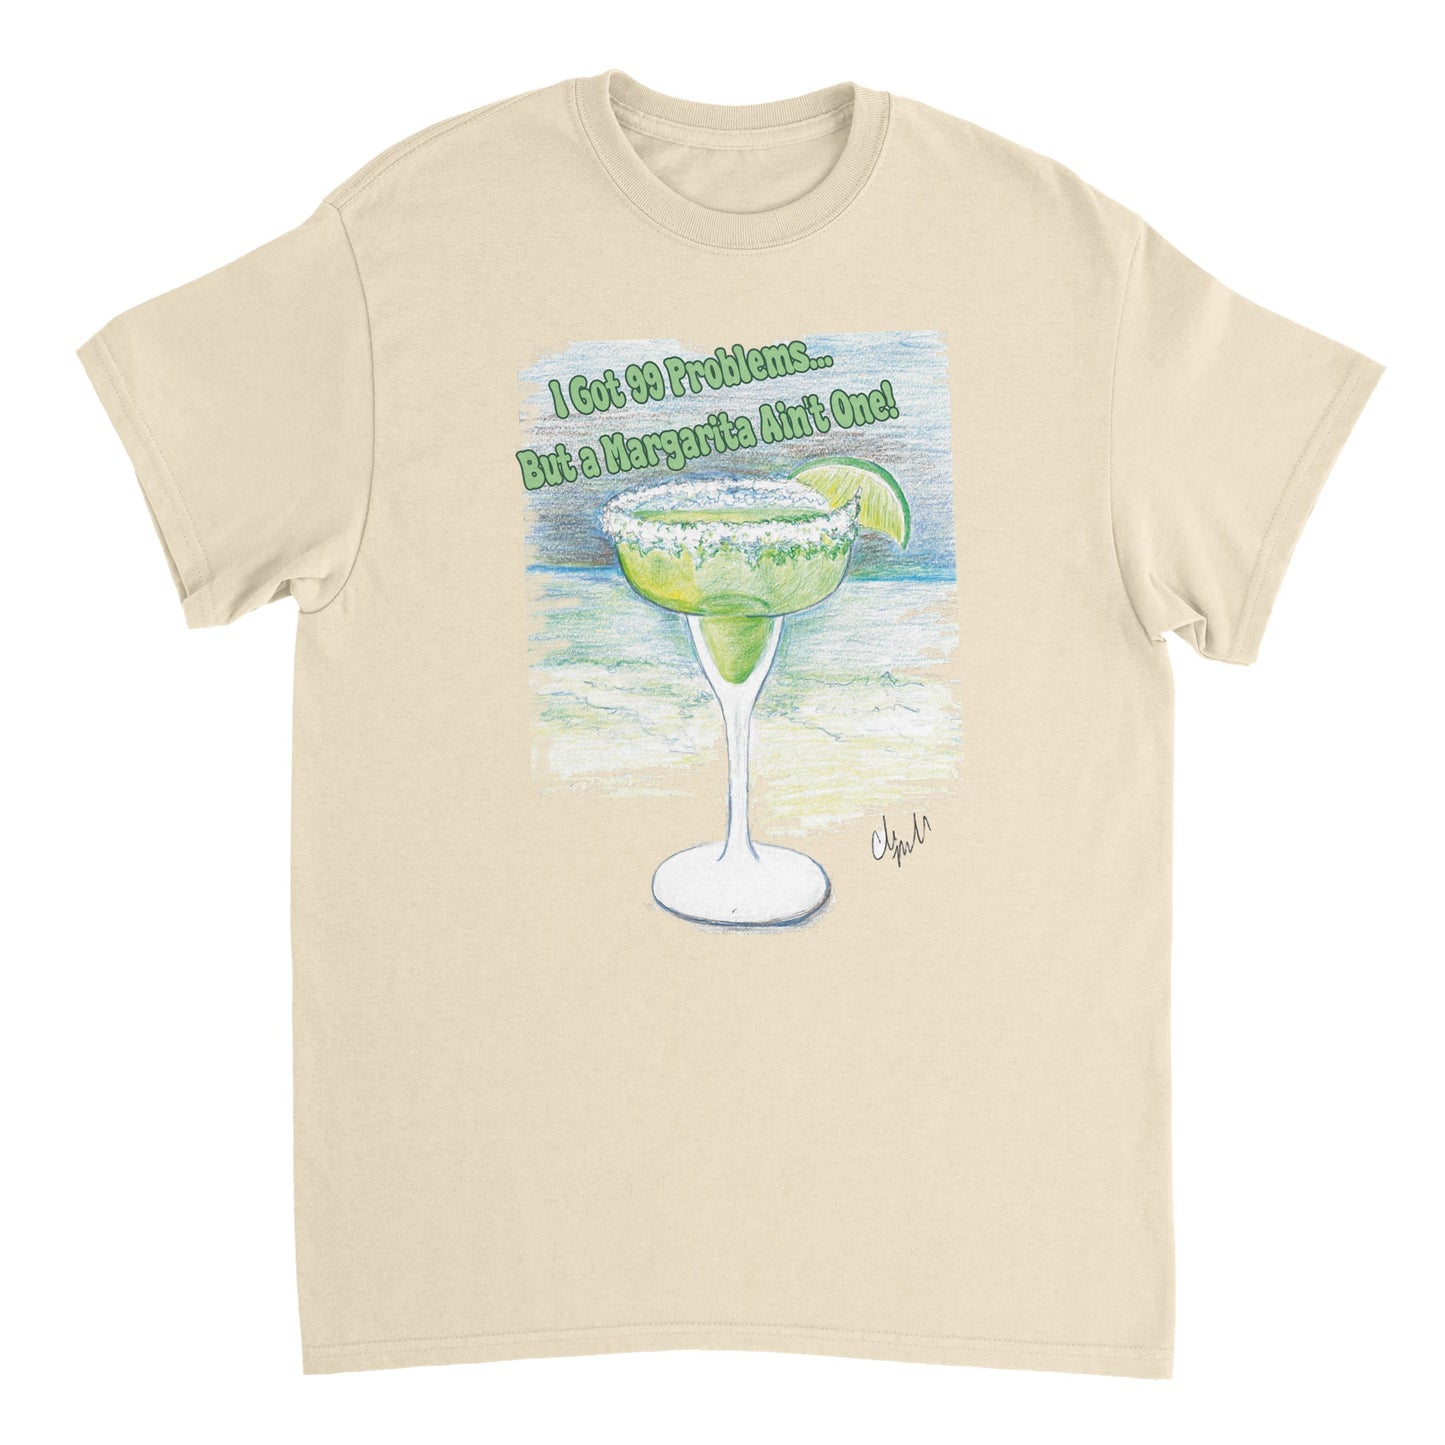 A natural heavyweight Unisex Crewneck cotton t-shirt with artwork I Got 99 Problems… But A Margarita Ain’t One! on the front from WhatYa Say Apparel lying flat.